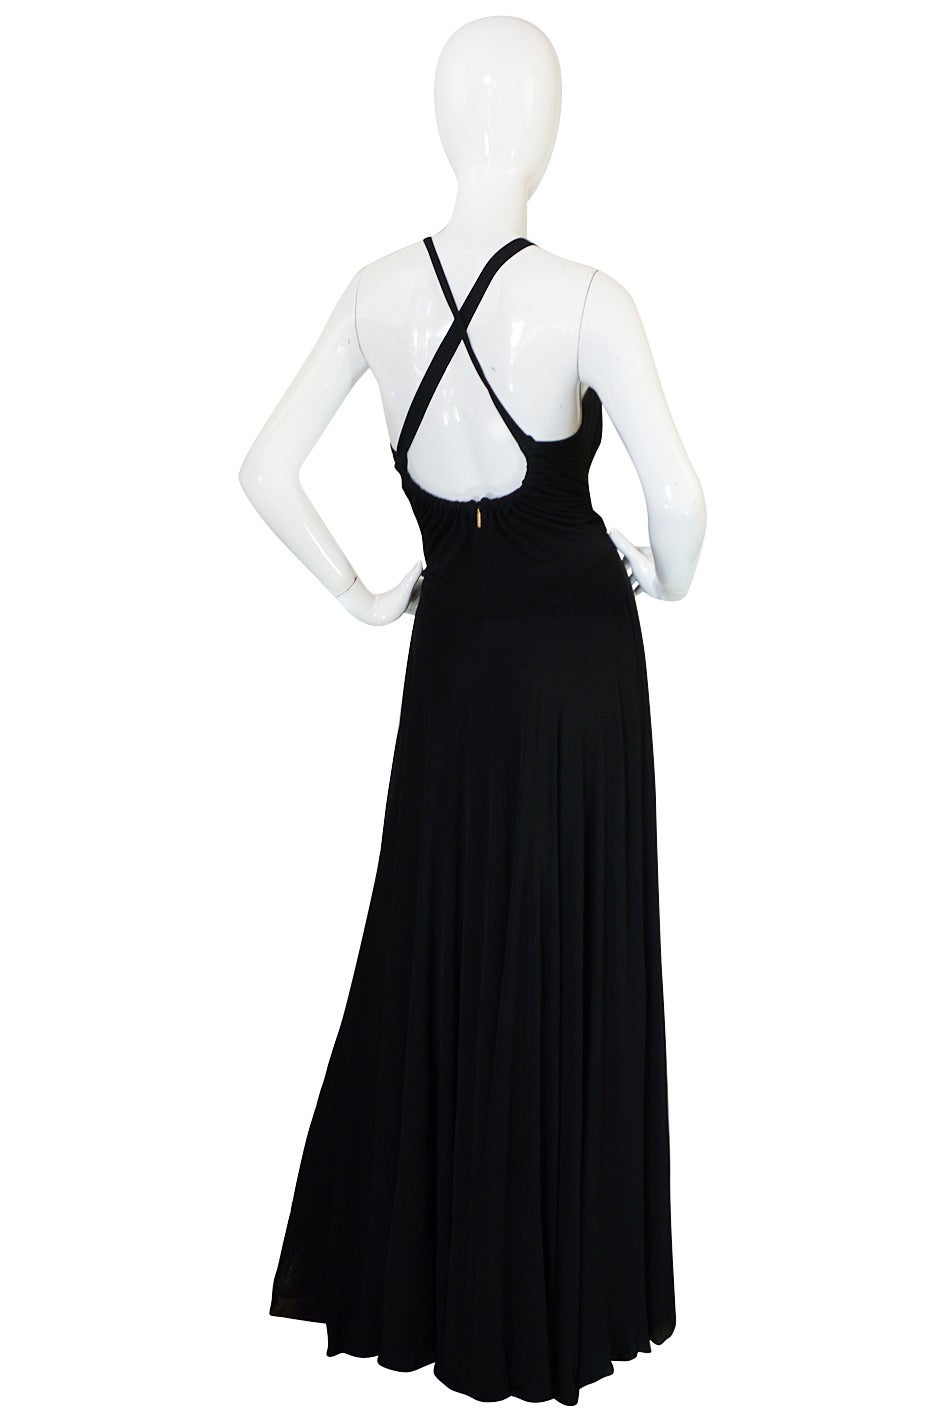 This gorgeous black silk jersey gown is pure Cavalli - it is both sexy and jet set chic. The gown is constructed of yards and yards of luxurious silk jersey that moves and drapes perfectly into place and is insanely comfortable to wear. The bodice